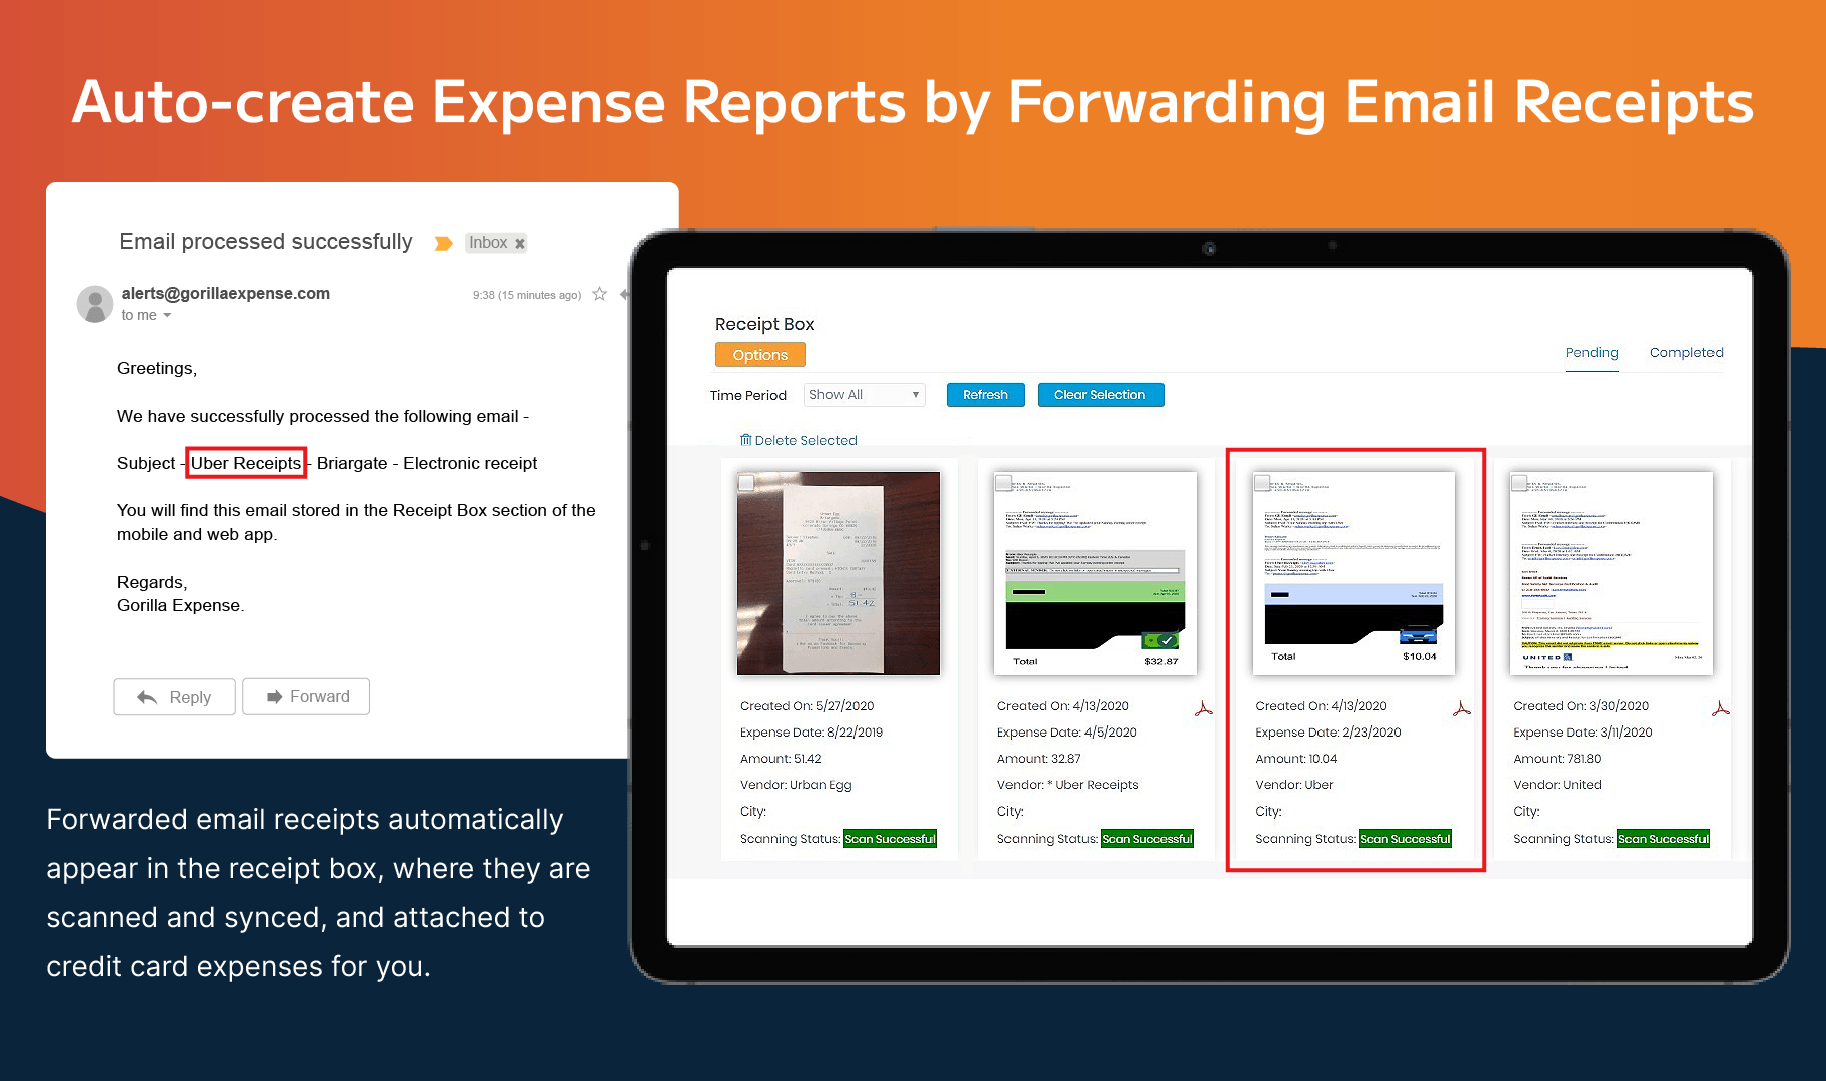 Auto-Create Expense Reports by Forwarding Email Receipts